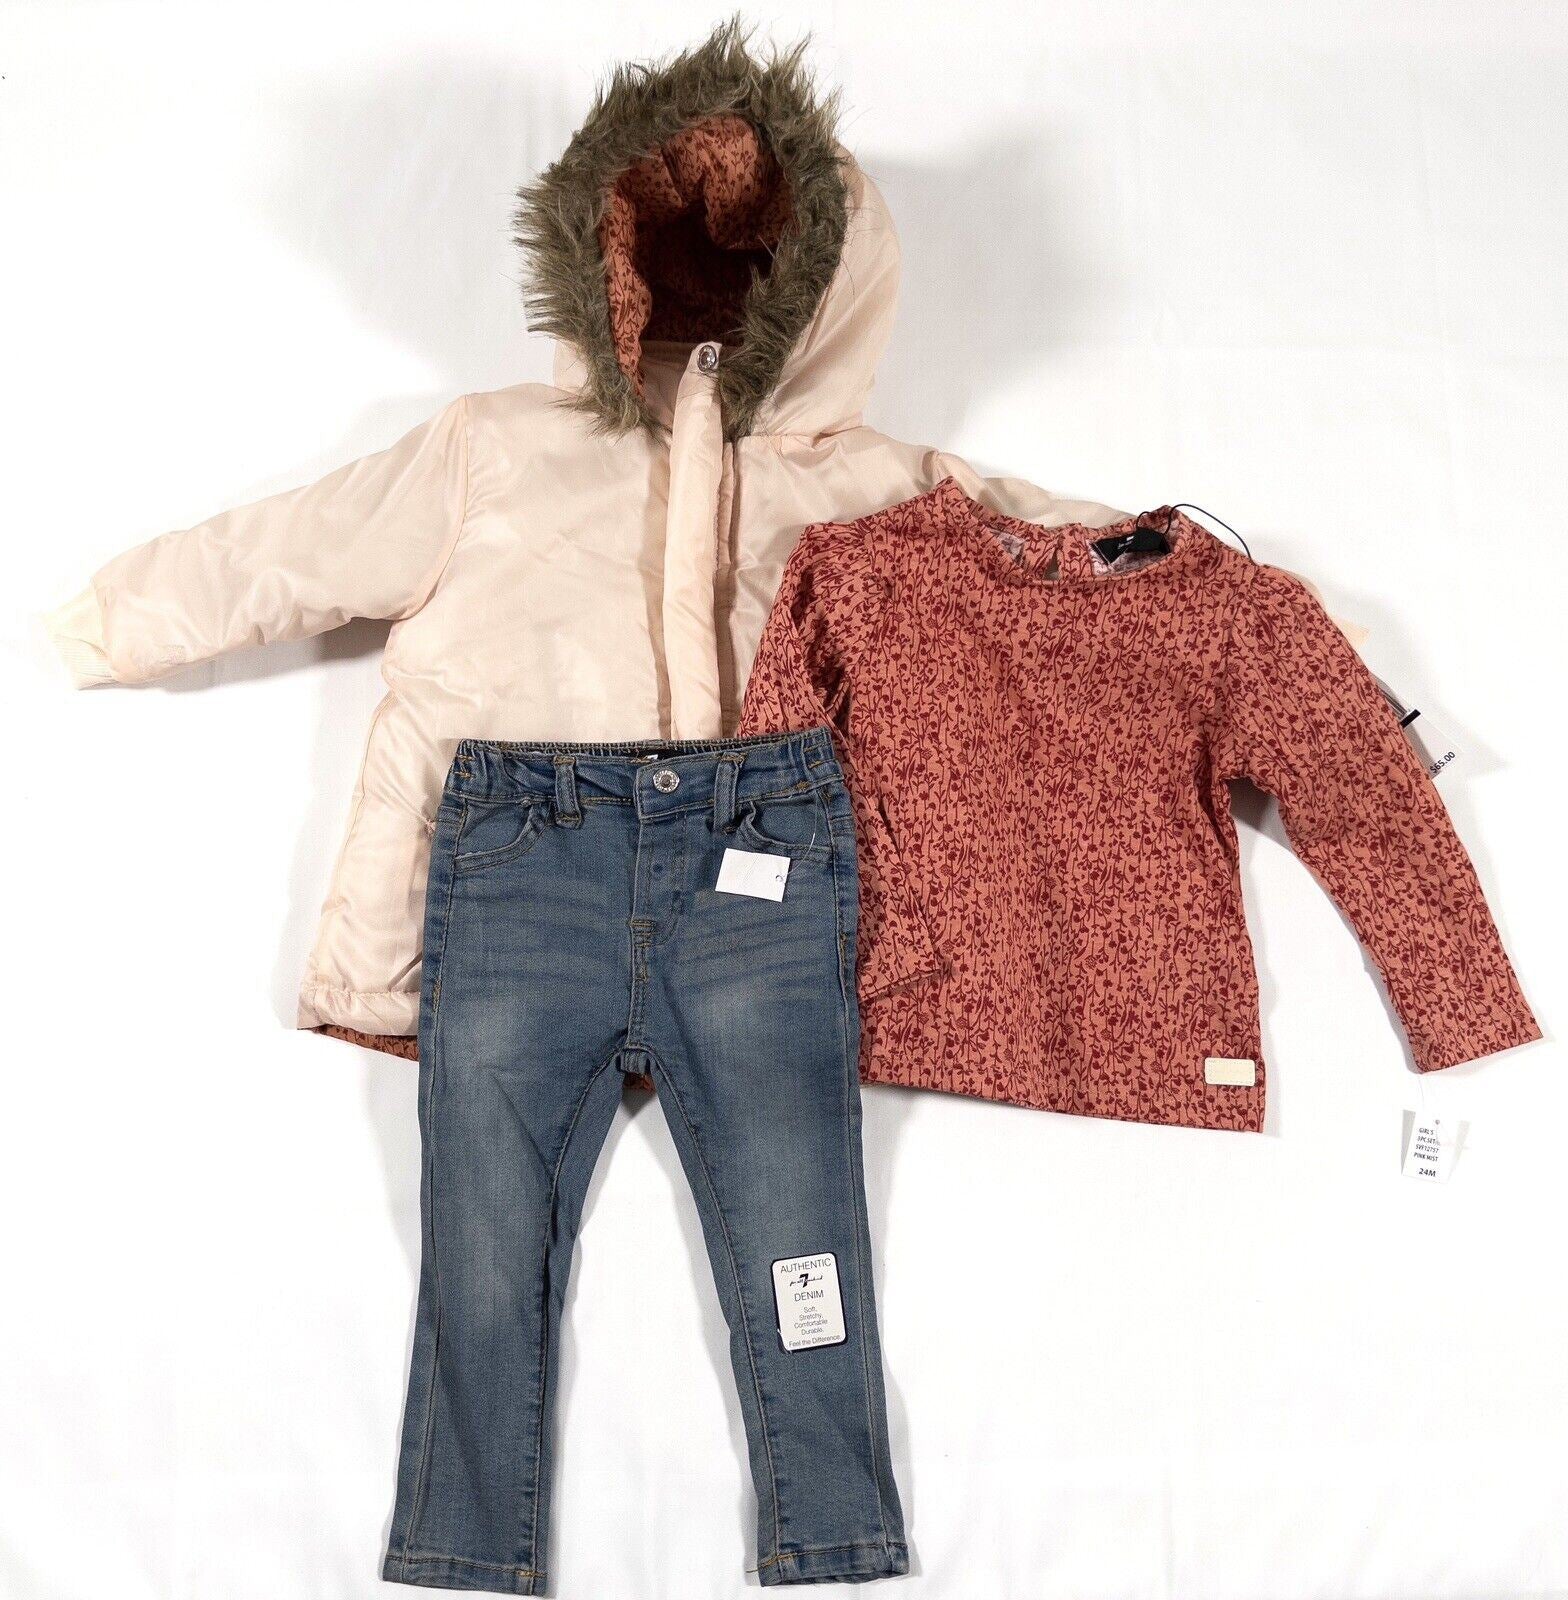 7 FOR ALL MANKIND Infant Girls 3 piece set Pink Coat Top Jeans Size UK 24 Months